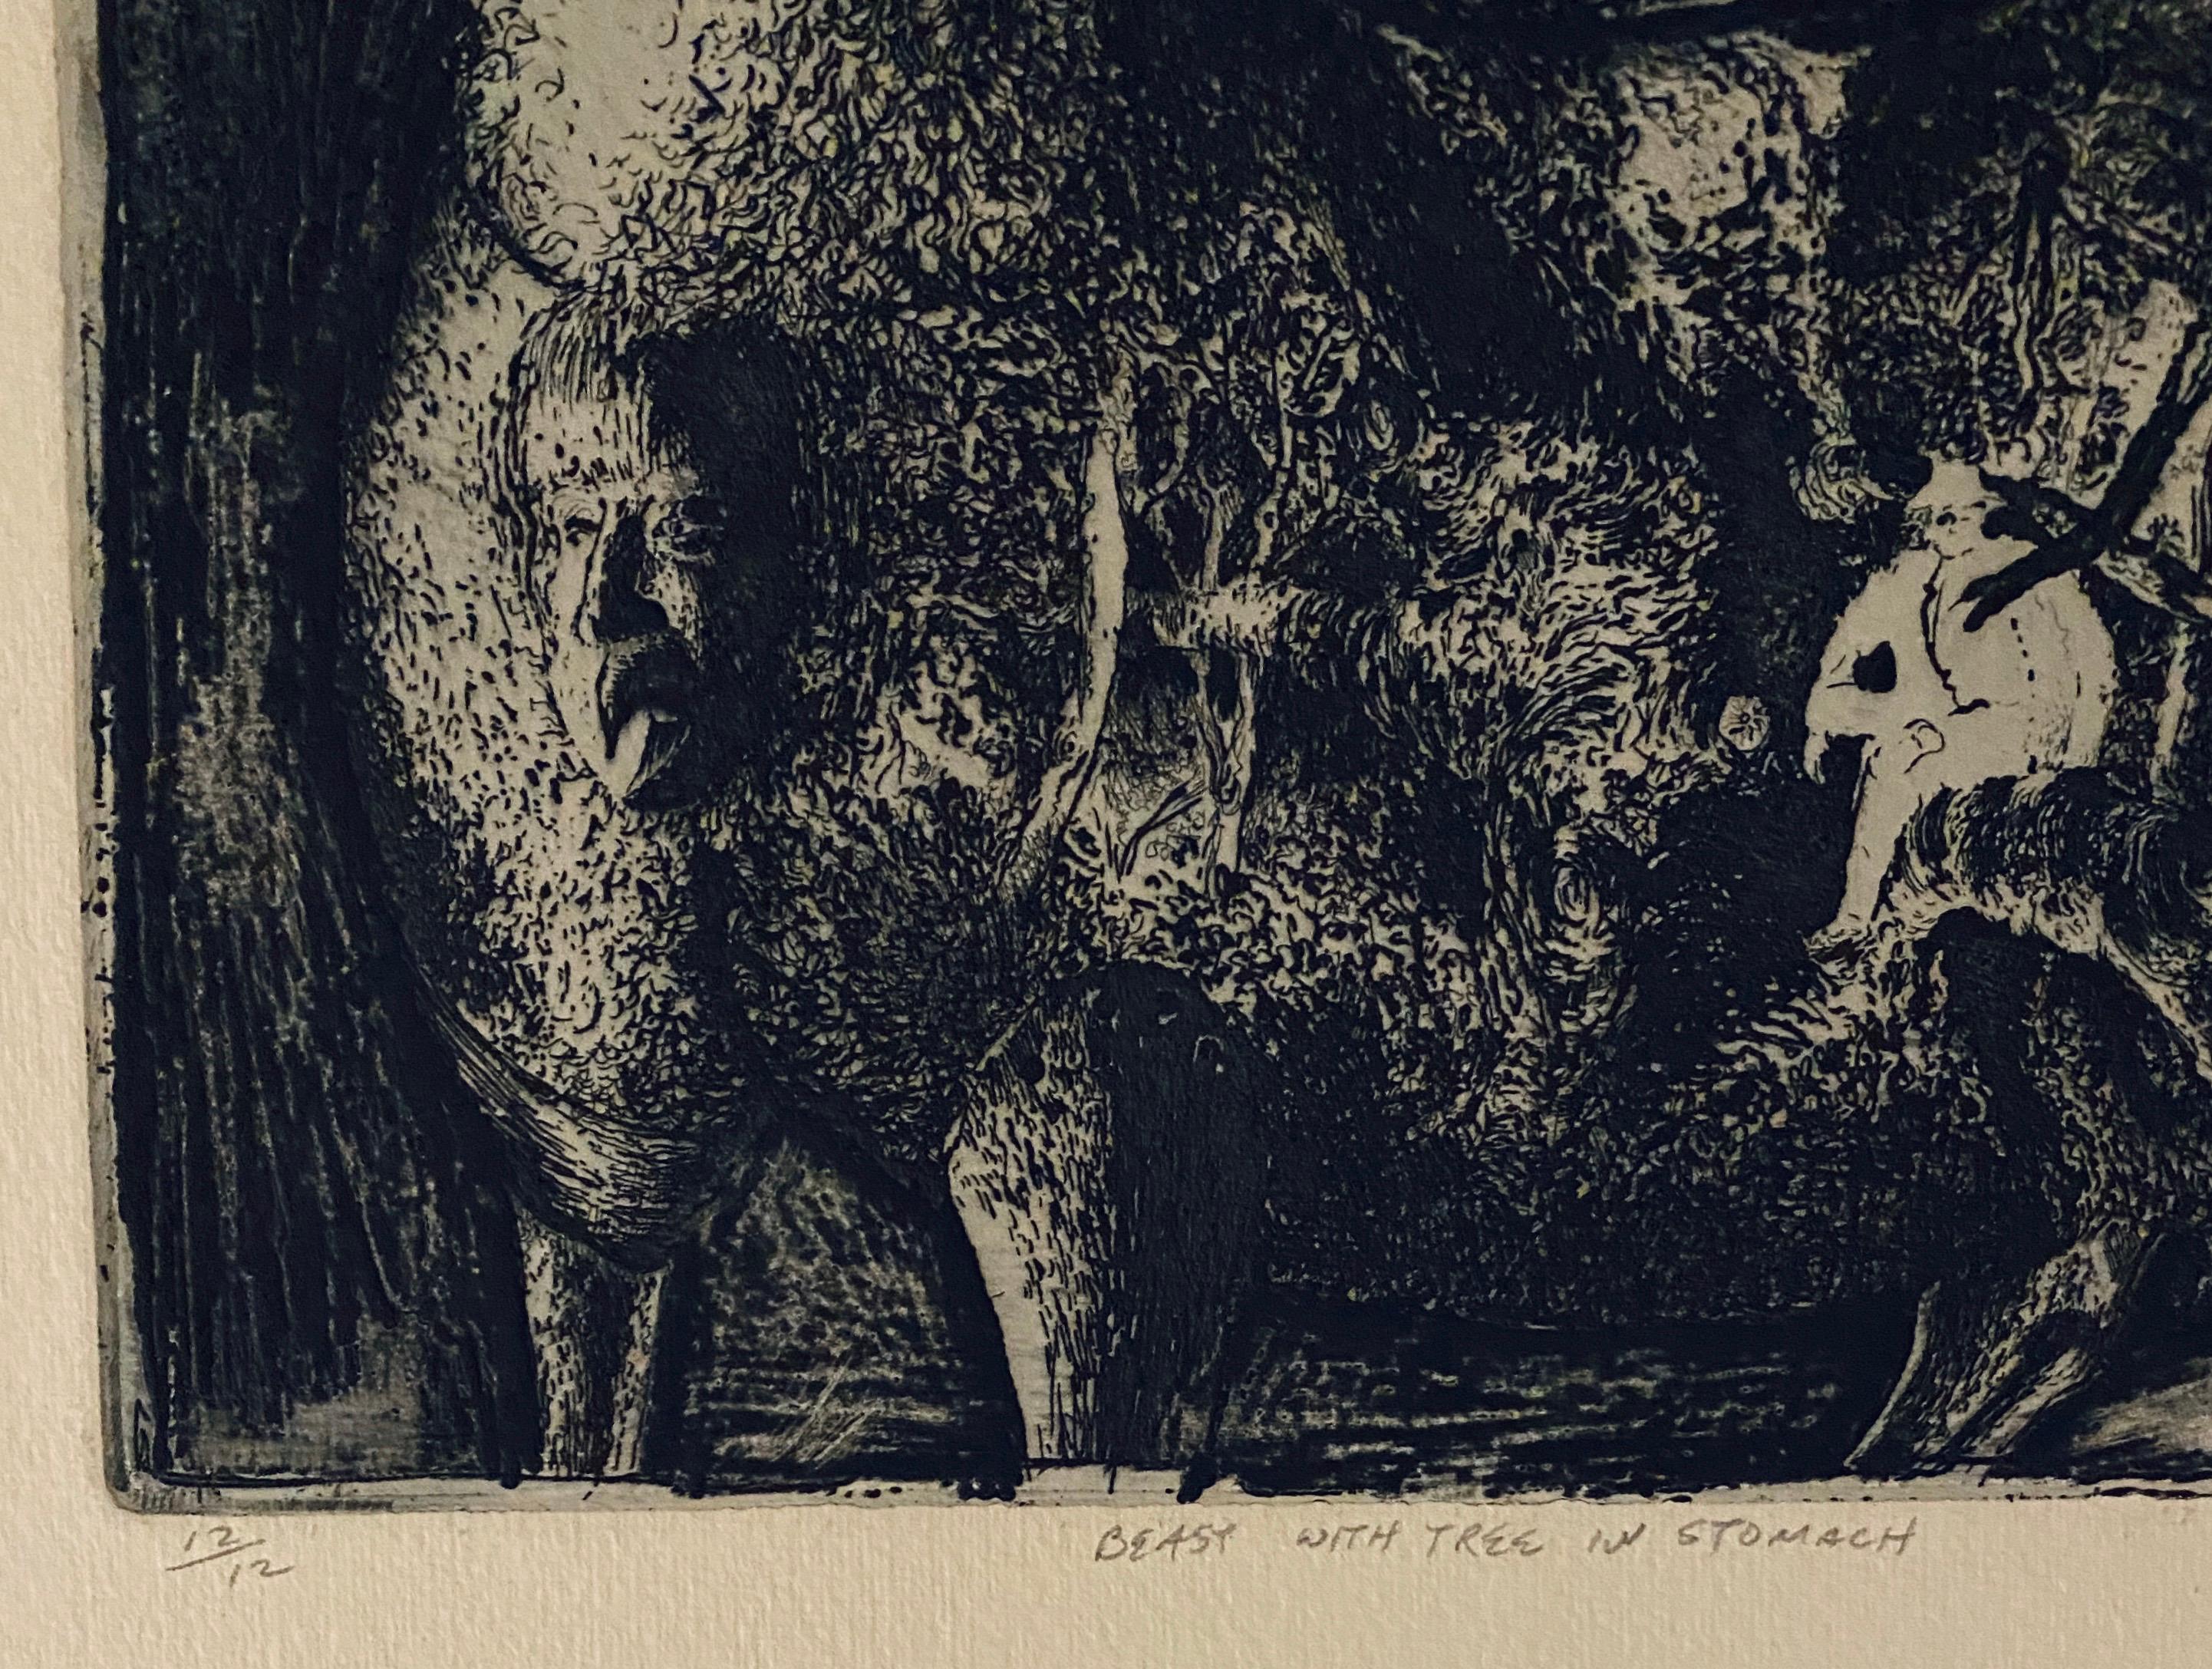 Beast With Tree In Stomach, American Modernist Abstract Etching - Black Interior Print by Robert A. Birmelin